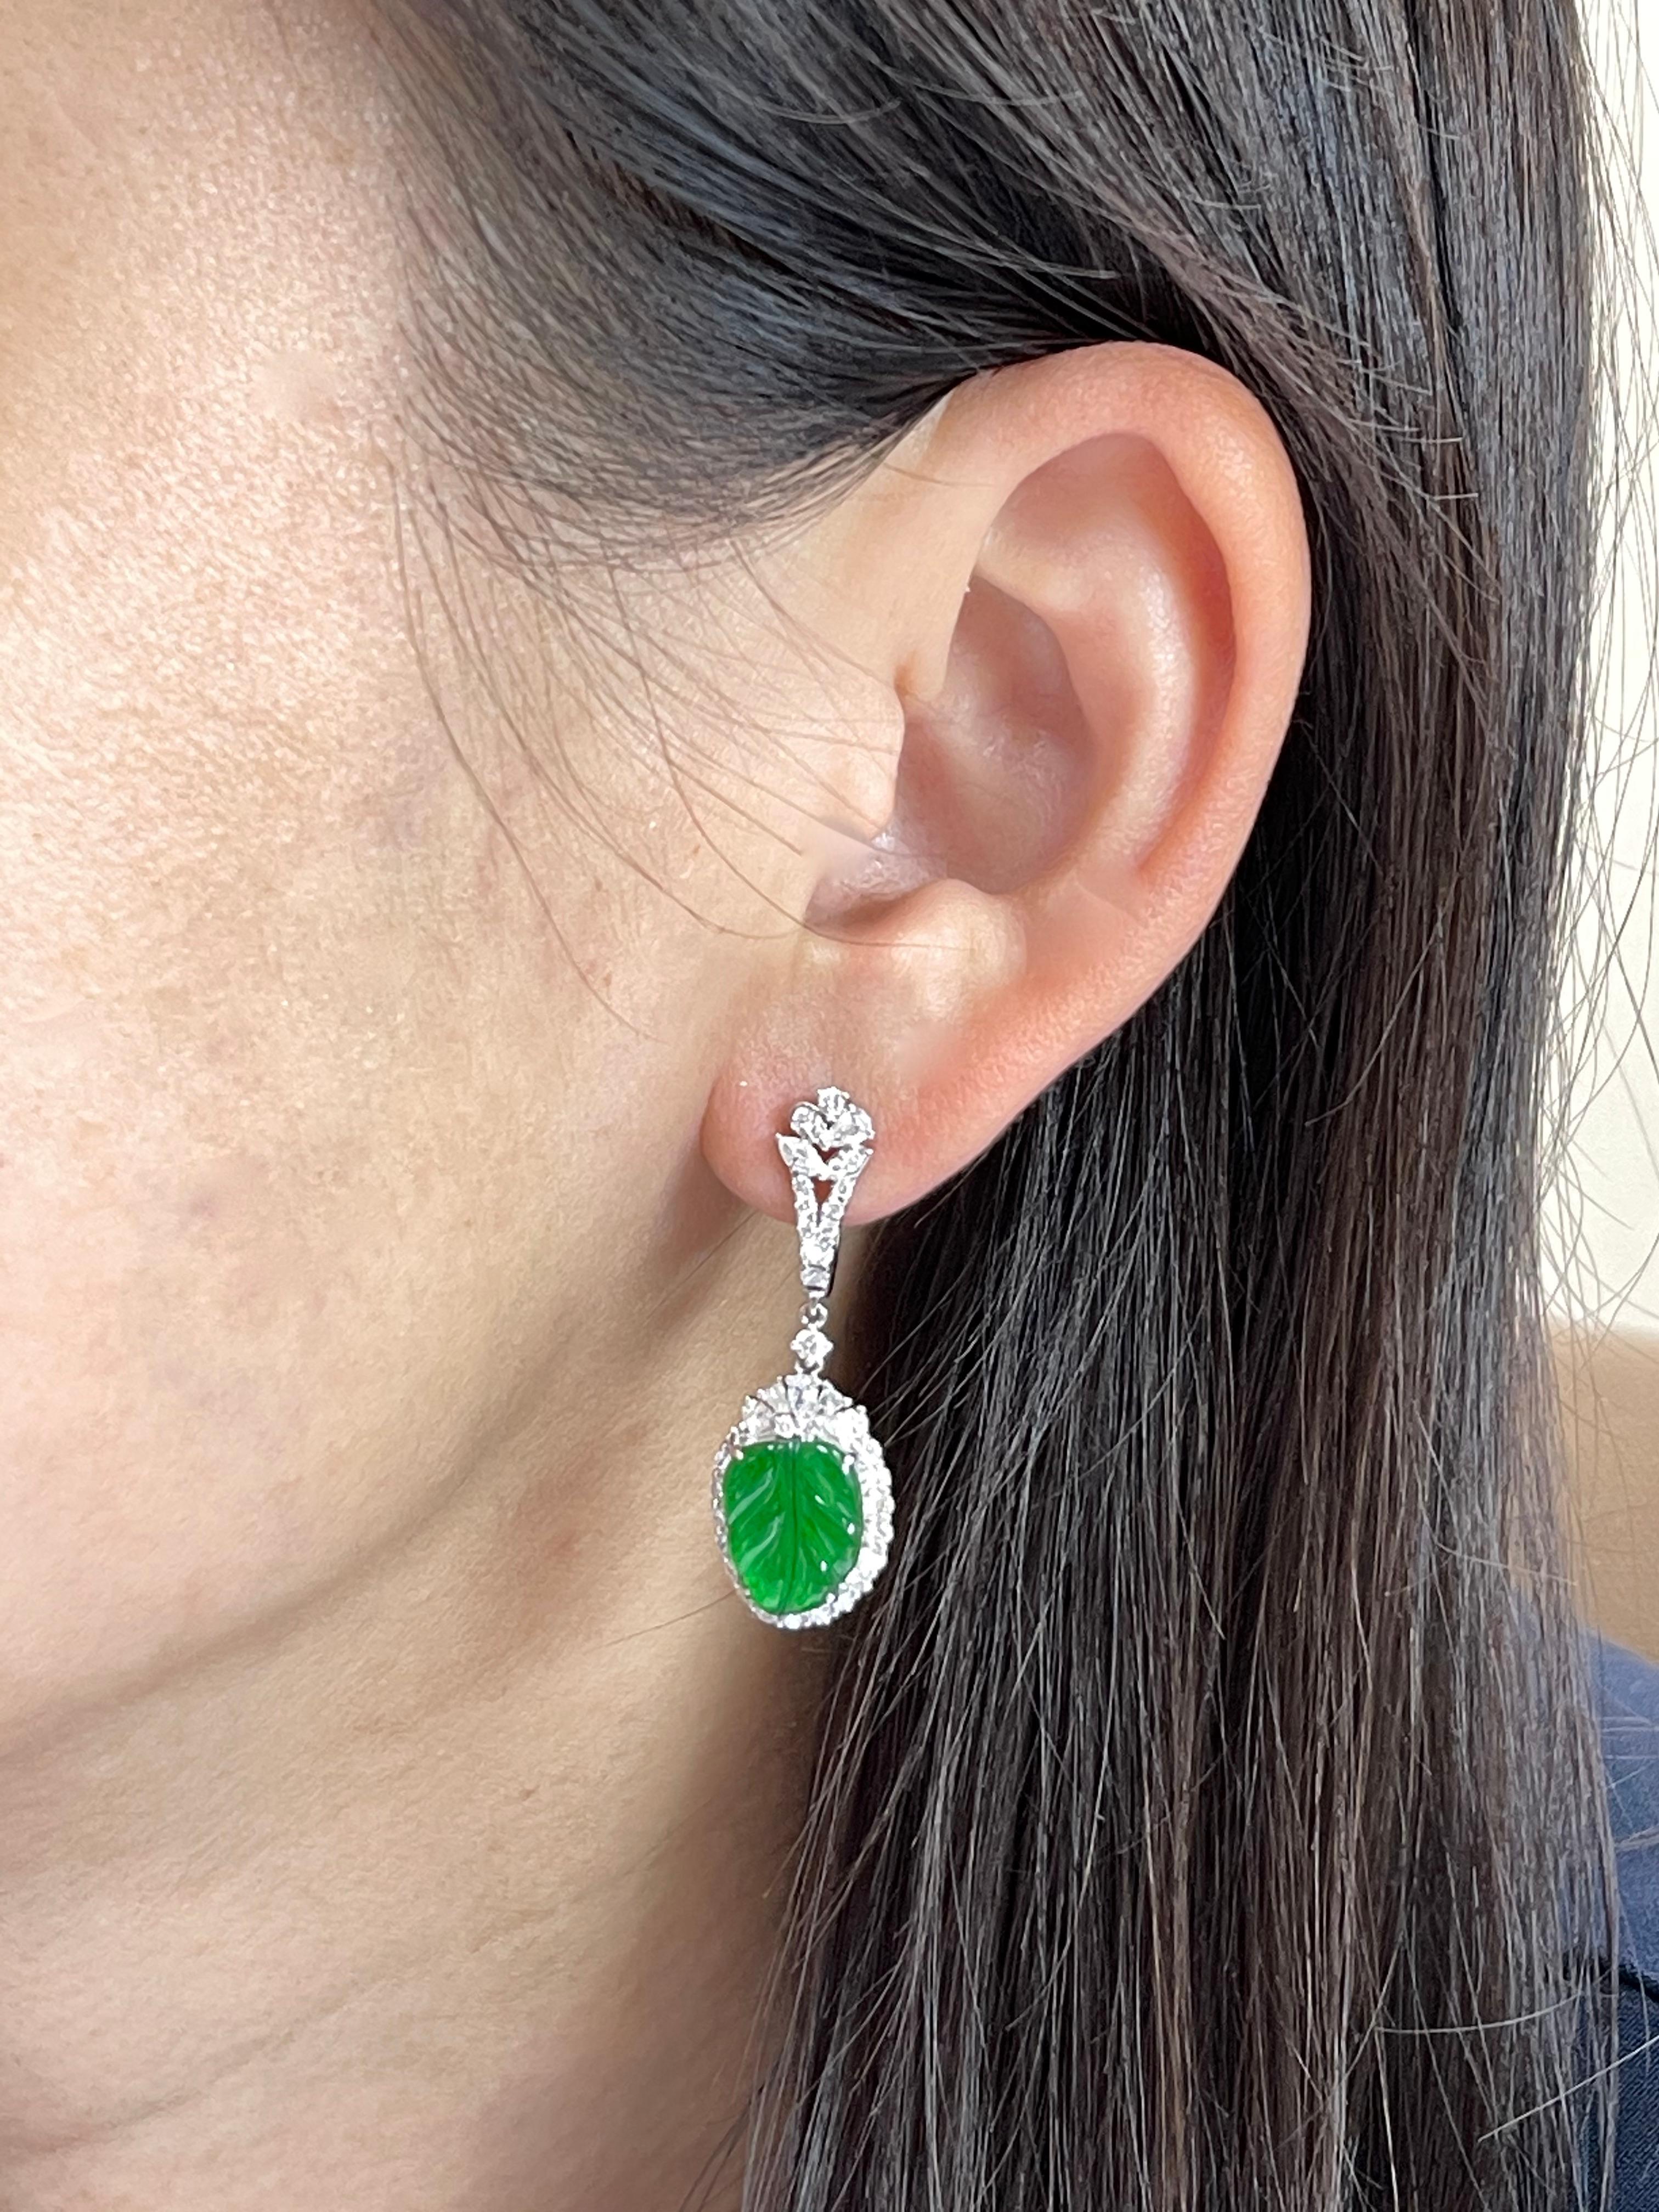 This is a very special pair of earrings. They GLOW! The jade in these earrings are certified by two labs to be natural jadeite jade. The earrings are set in 18k white gold. There are 2 carved apple green jade leaf motifs and 1.791cts of white